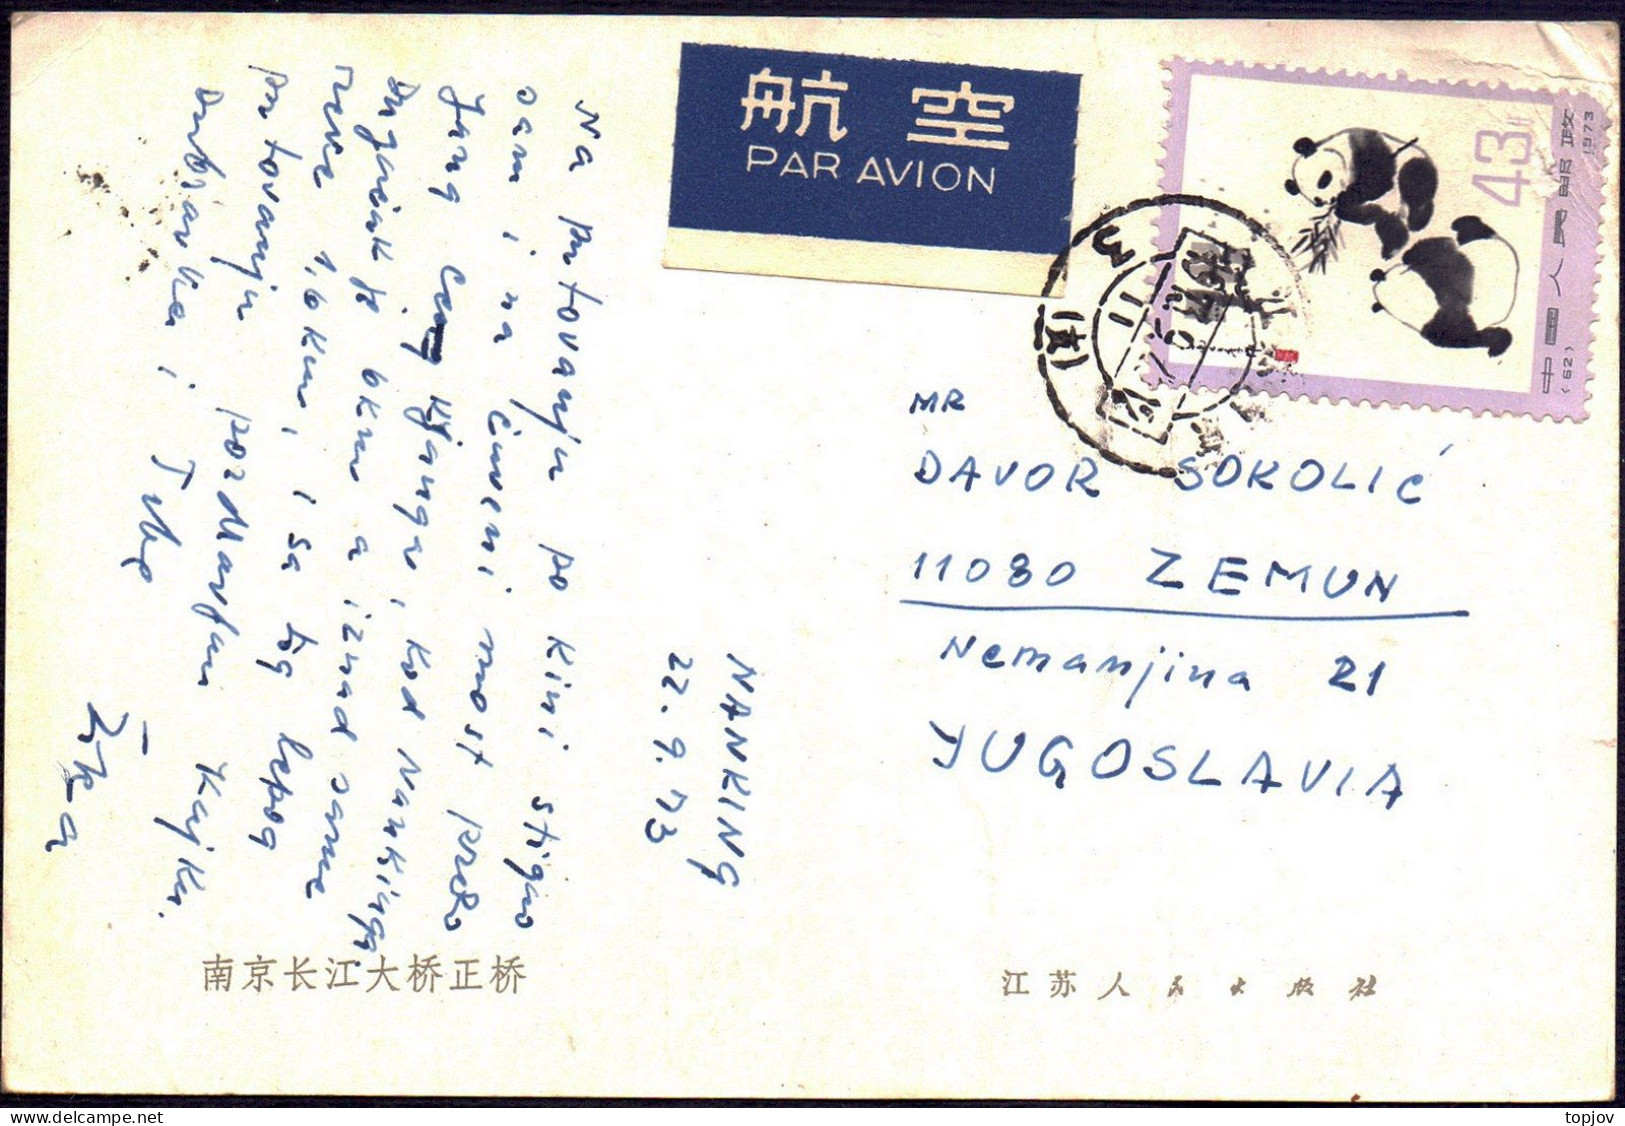 CHINA - KINA - GIANT PANDA On AIRMAIL - 1973 - Lettres & Documents